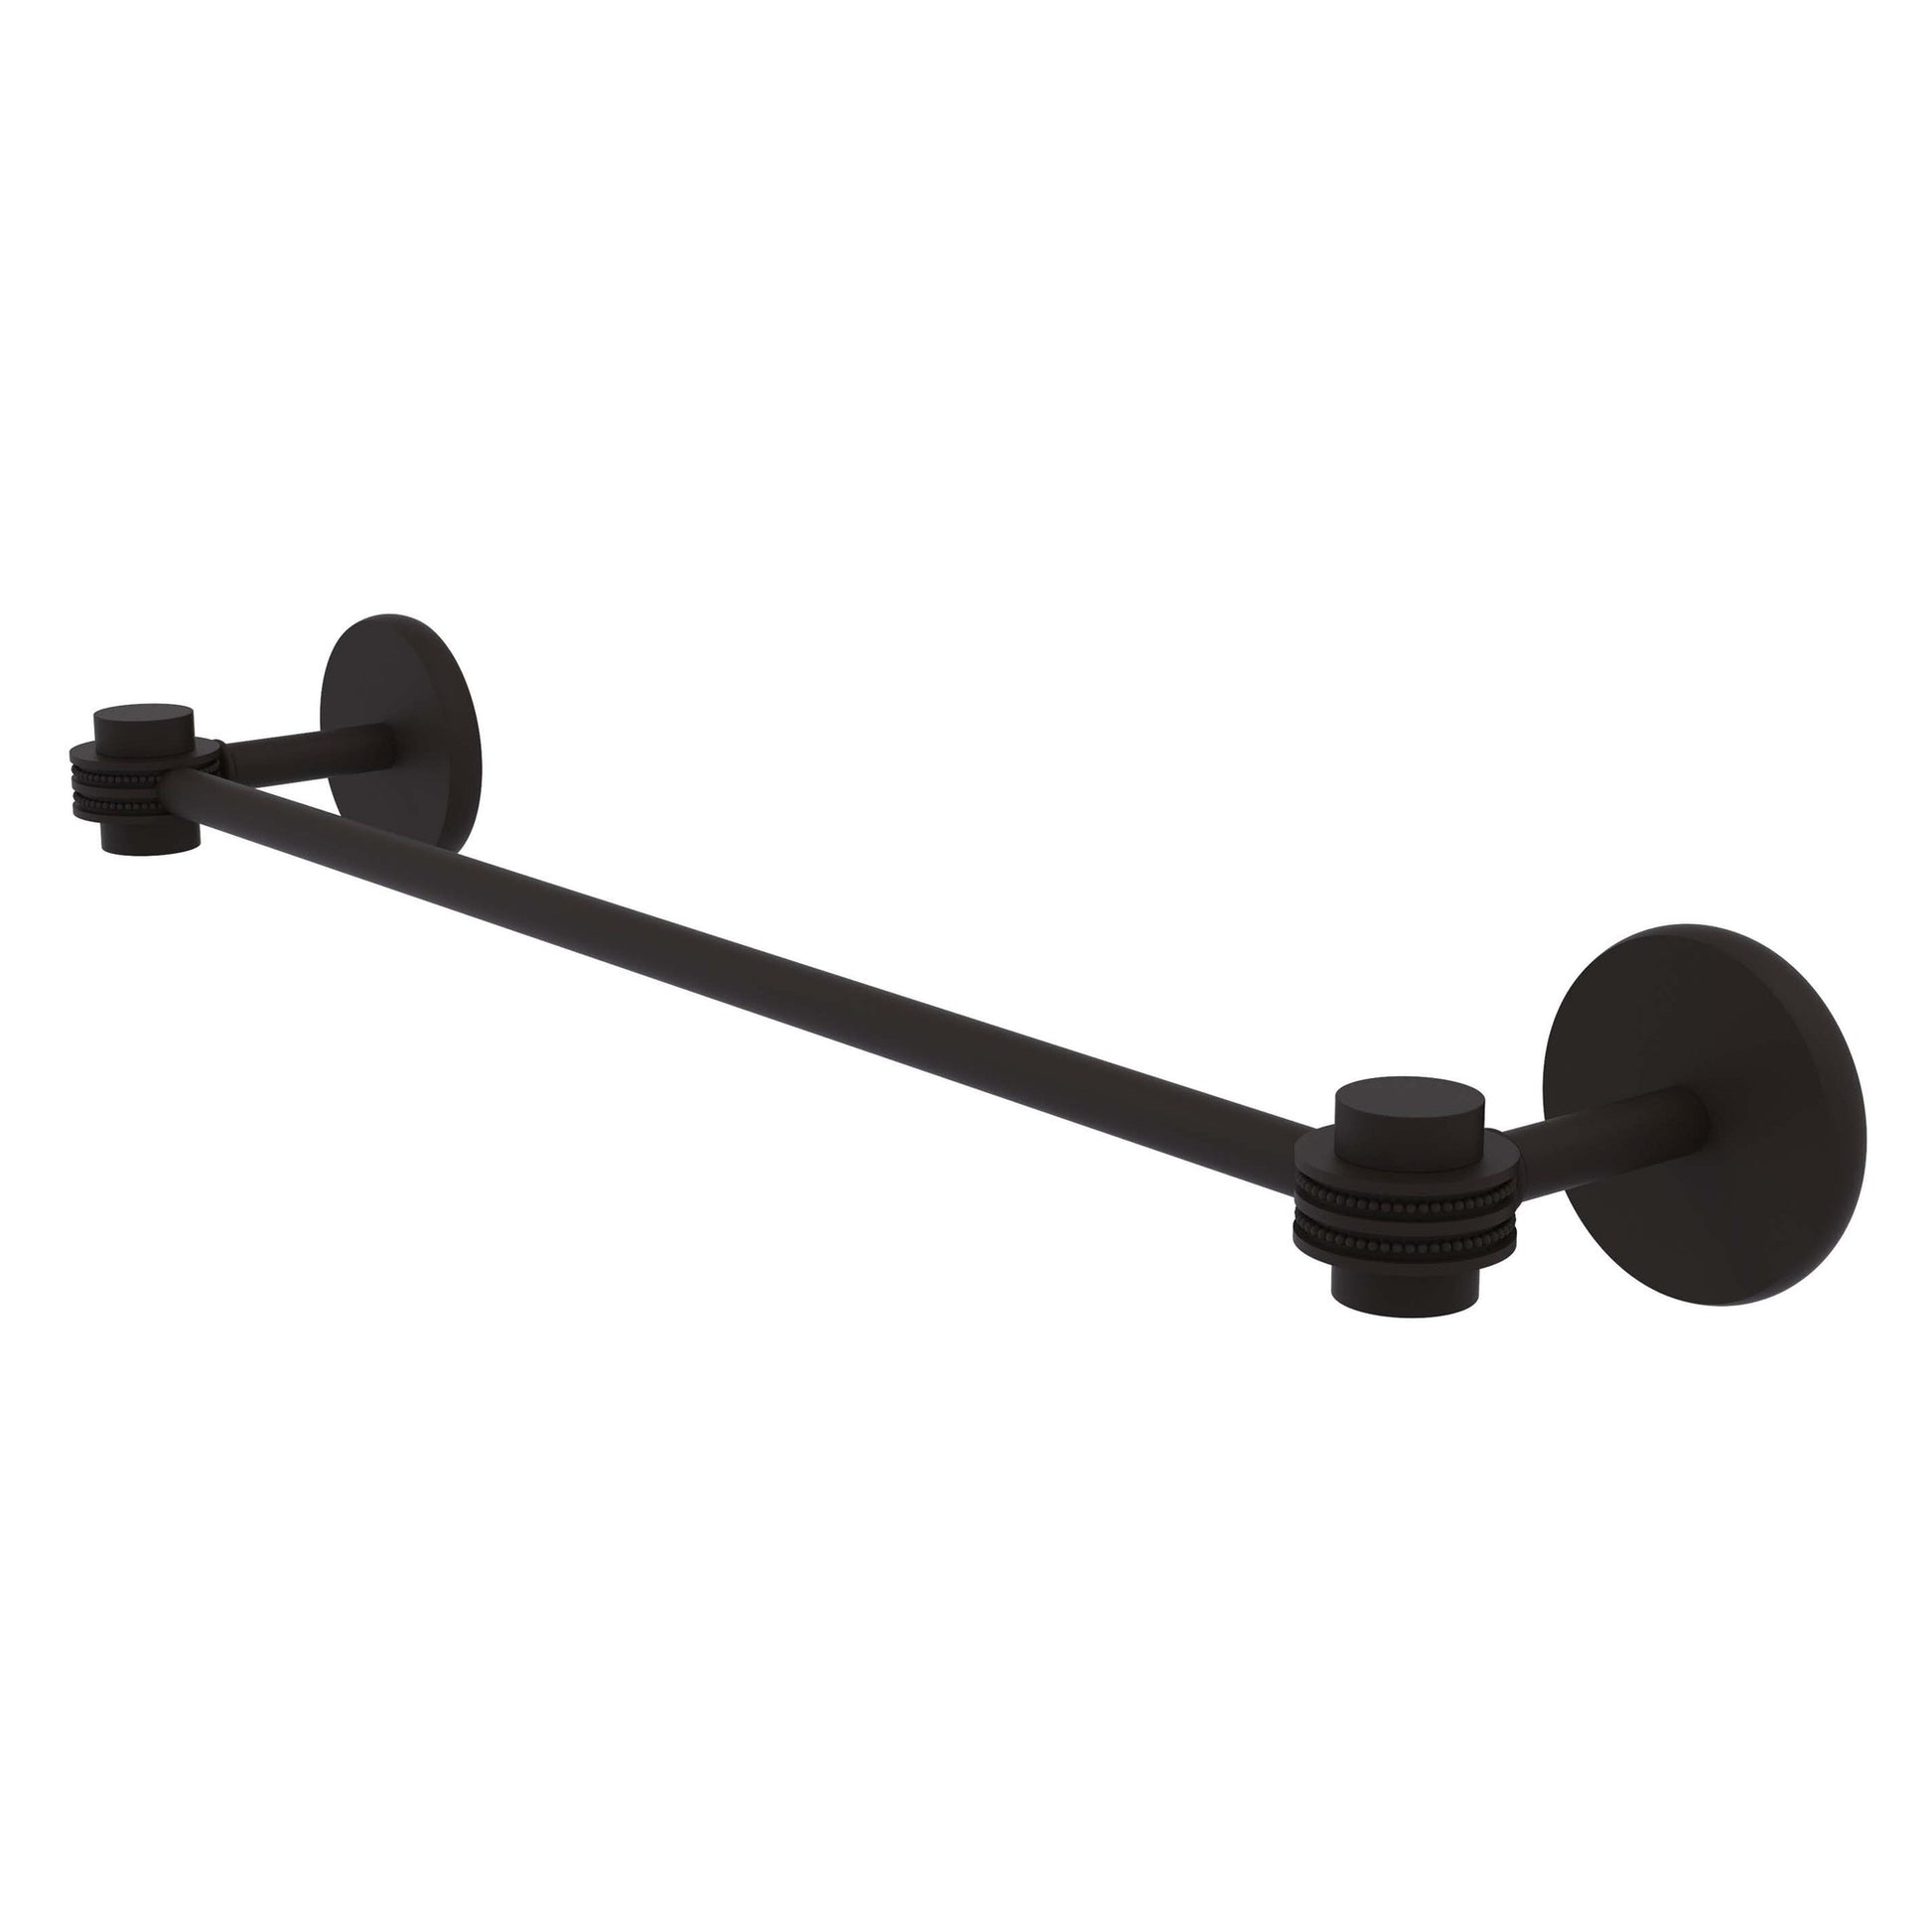 Allied Brass Satellite Orbit One 36" x 38.5" Oil Rubbed Bronze Solid Brass Towel Bar With Dotted Accents